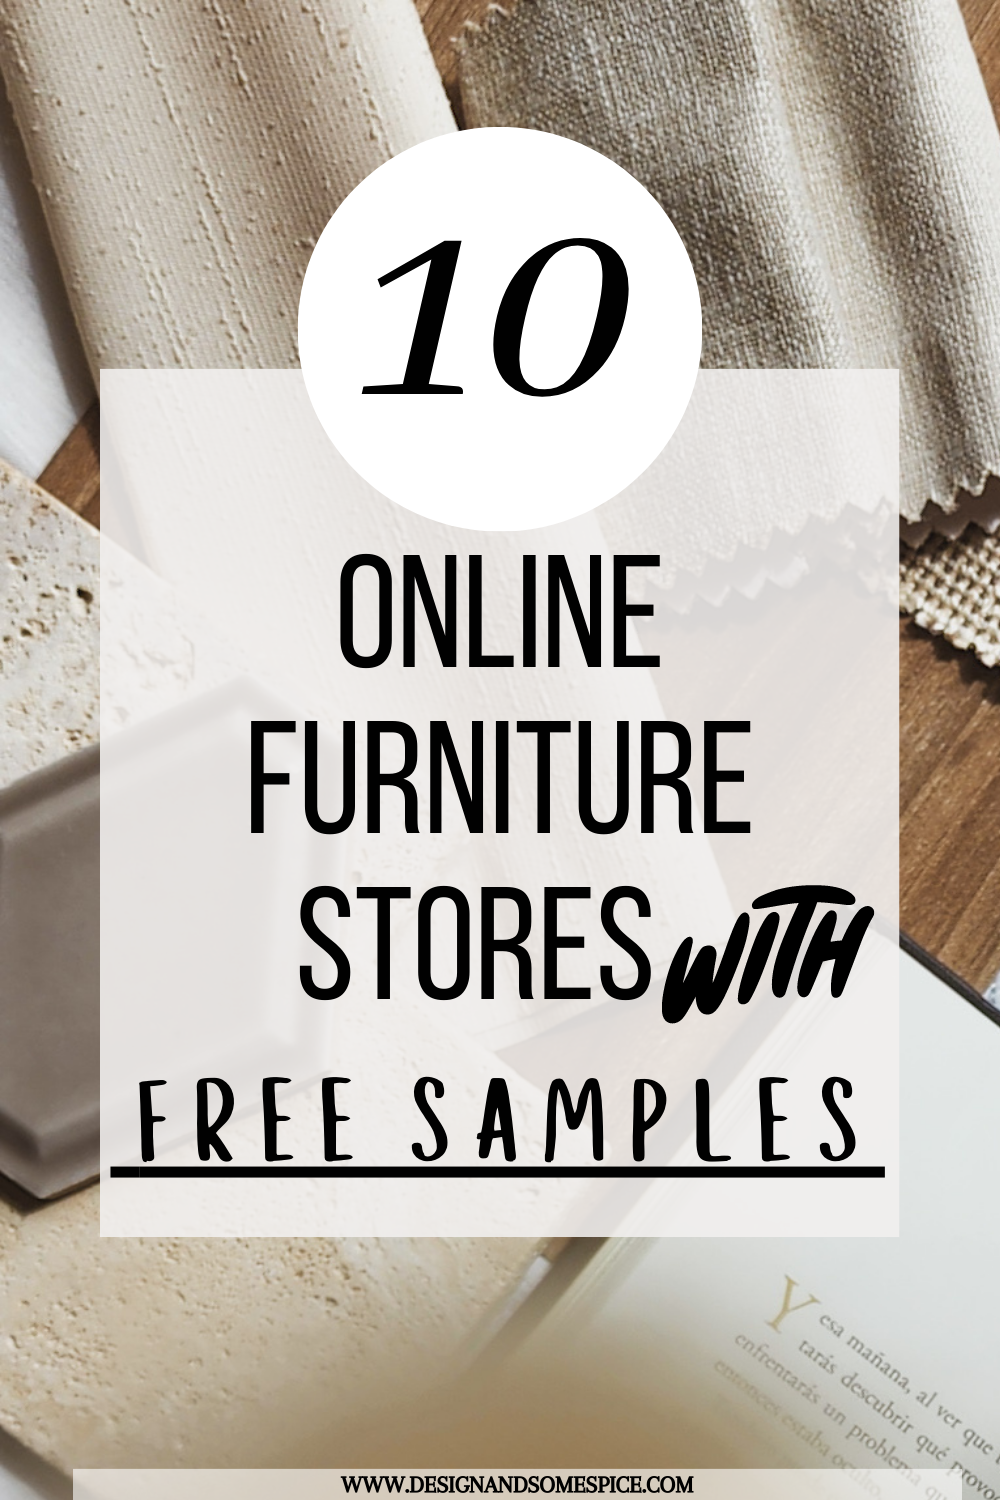 No-cost furniture samples